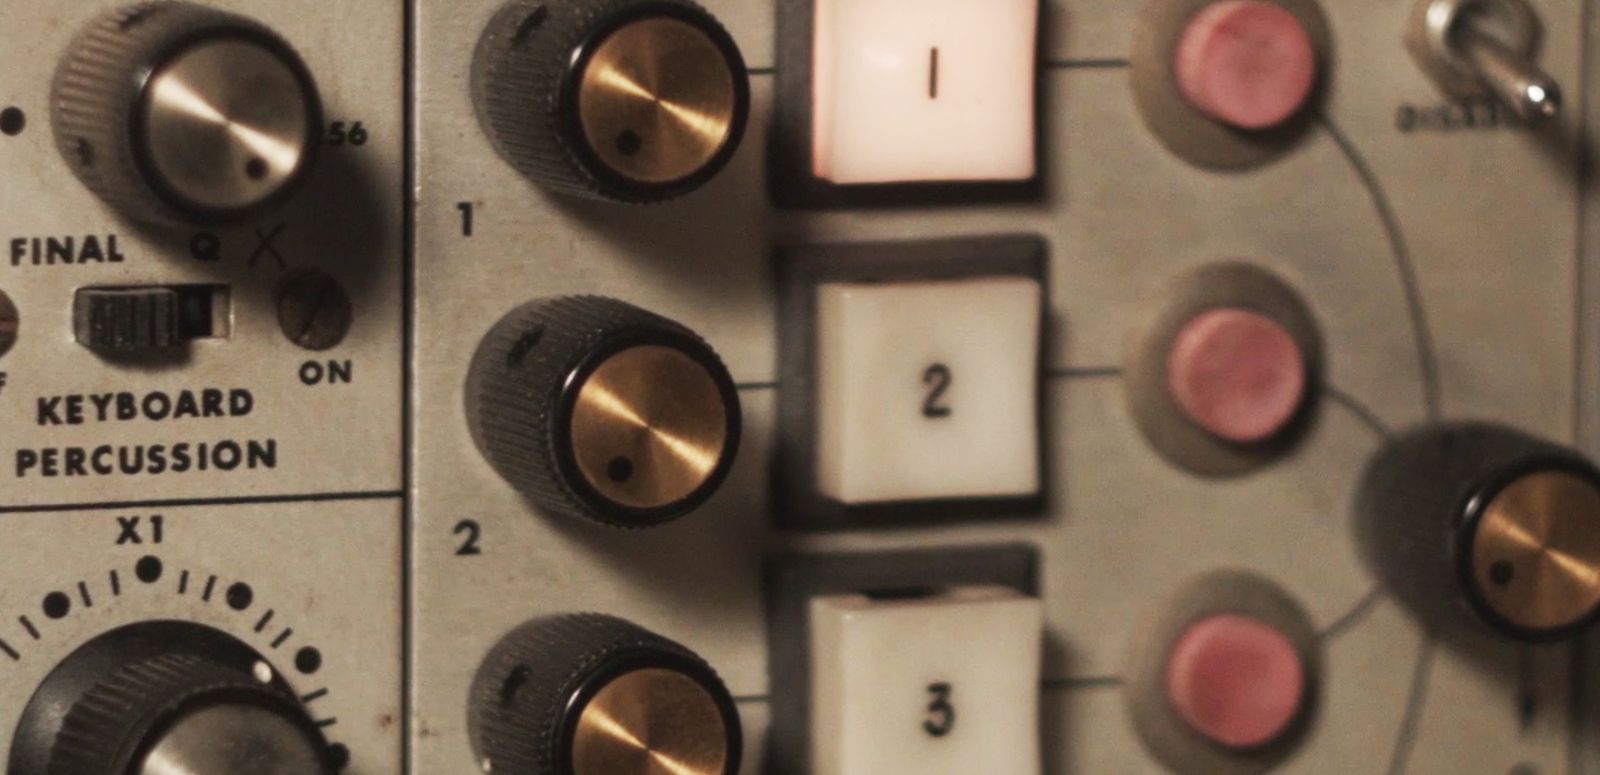 Knobs and light switches of a synthesizer